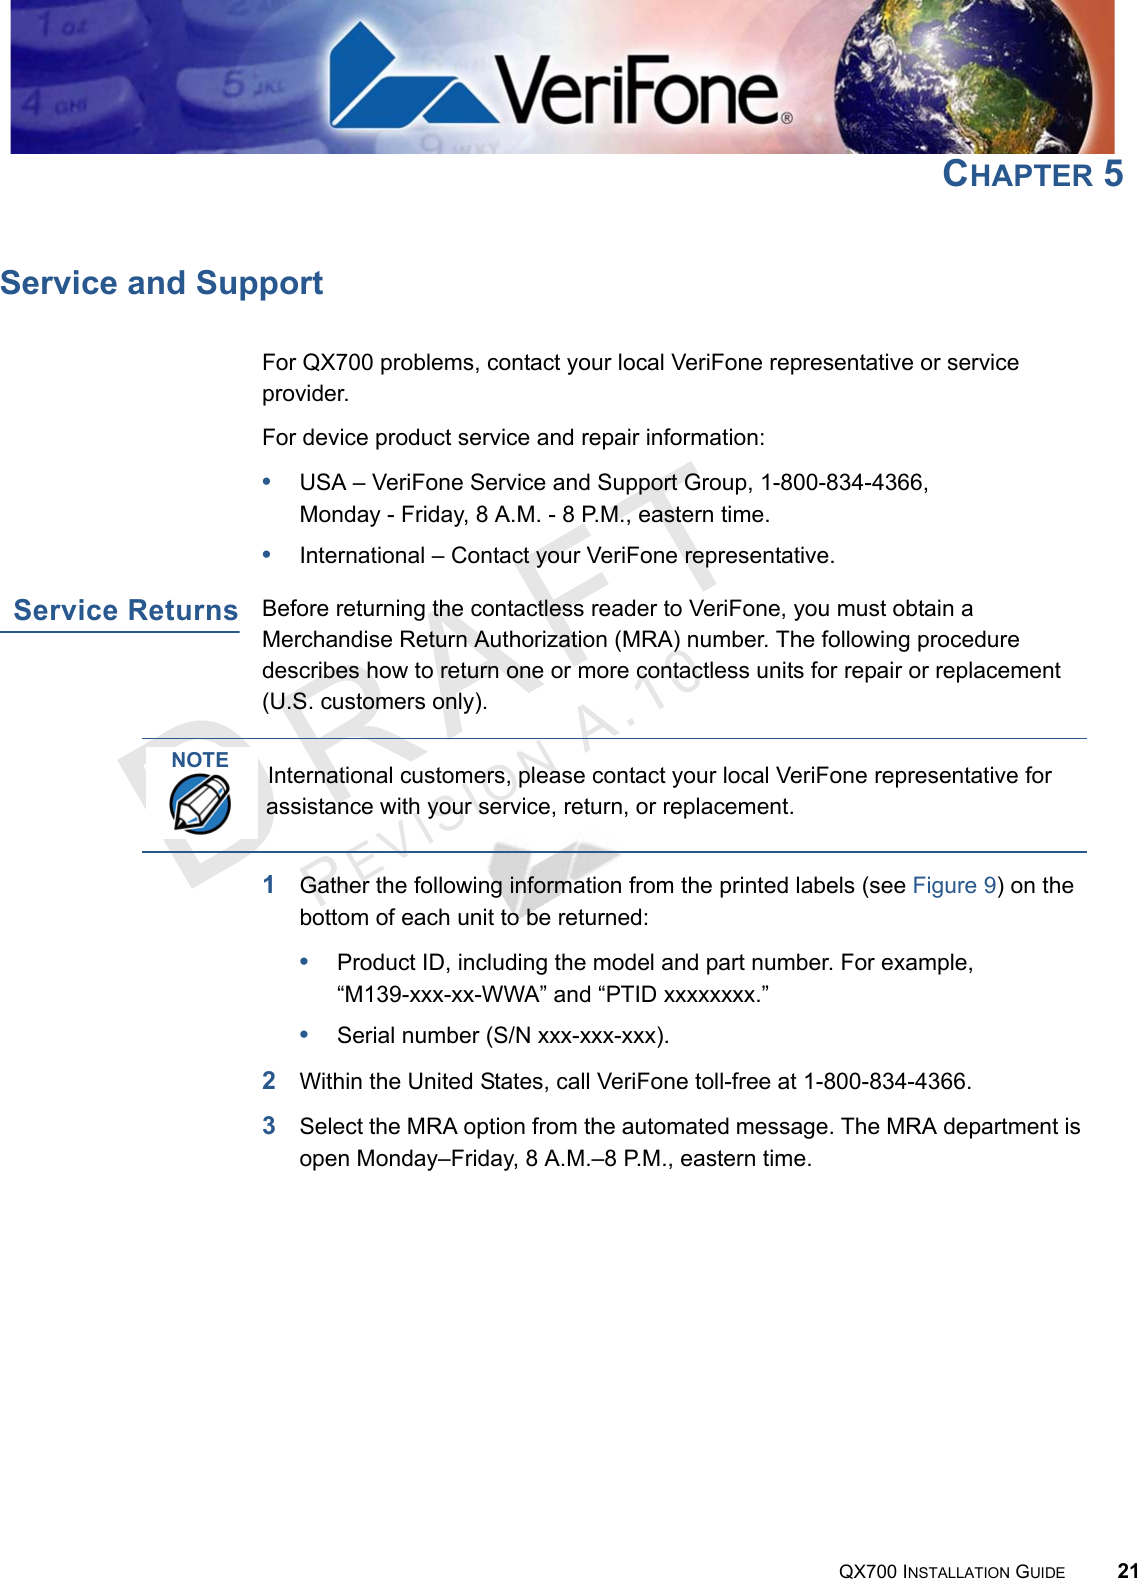 REVISION A.10 QX700 INSTALLATION GUIDE 21CHAPTER 5Service and SupportFor QX700 problems, contact your local VeriFone representative or service provider.For device product service and repair information:•USA – VeriFone Service and Support Group, 1-800-834-4366, Monday - Friday, 8 A.M. - 8 P.M., eastern time.•International – Contact your VeriFone representative.Service ReturnsBefore returning the contactless reader to VeriFone, you must obtain a Merchandise Return Authorization (MRA) number. The following procedure describes how to return one or more contactless units for repair or replacement (U.S. customers only).1Gather the following information from the printed labels (see Figure 9) on the bottom of each unit to be returned:•Product ID, including the model and part number. For example,“M139-xxx-xx-WWA” and “PTID xxxxxxxx.”•Serial number (S/N xxx-xxx-xxx).2Within the United States, call VeriFone toll-free at 1-800-834-4366.3Select the MRA option from the automated message. The MRA department is open Monday–Friday, 8 A.M.–8 P.M., eastern time.NOTEInternational customers, please contact your local VeriFone representative for assistance with your service, return, or replacement.